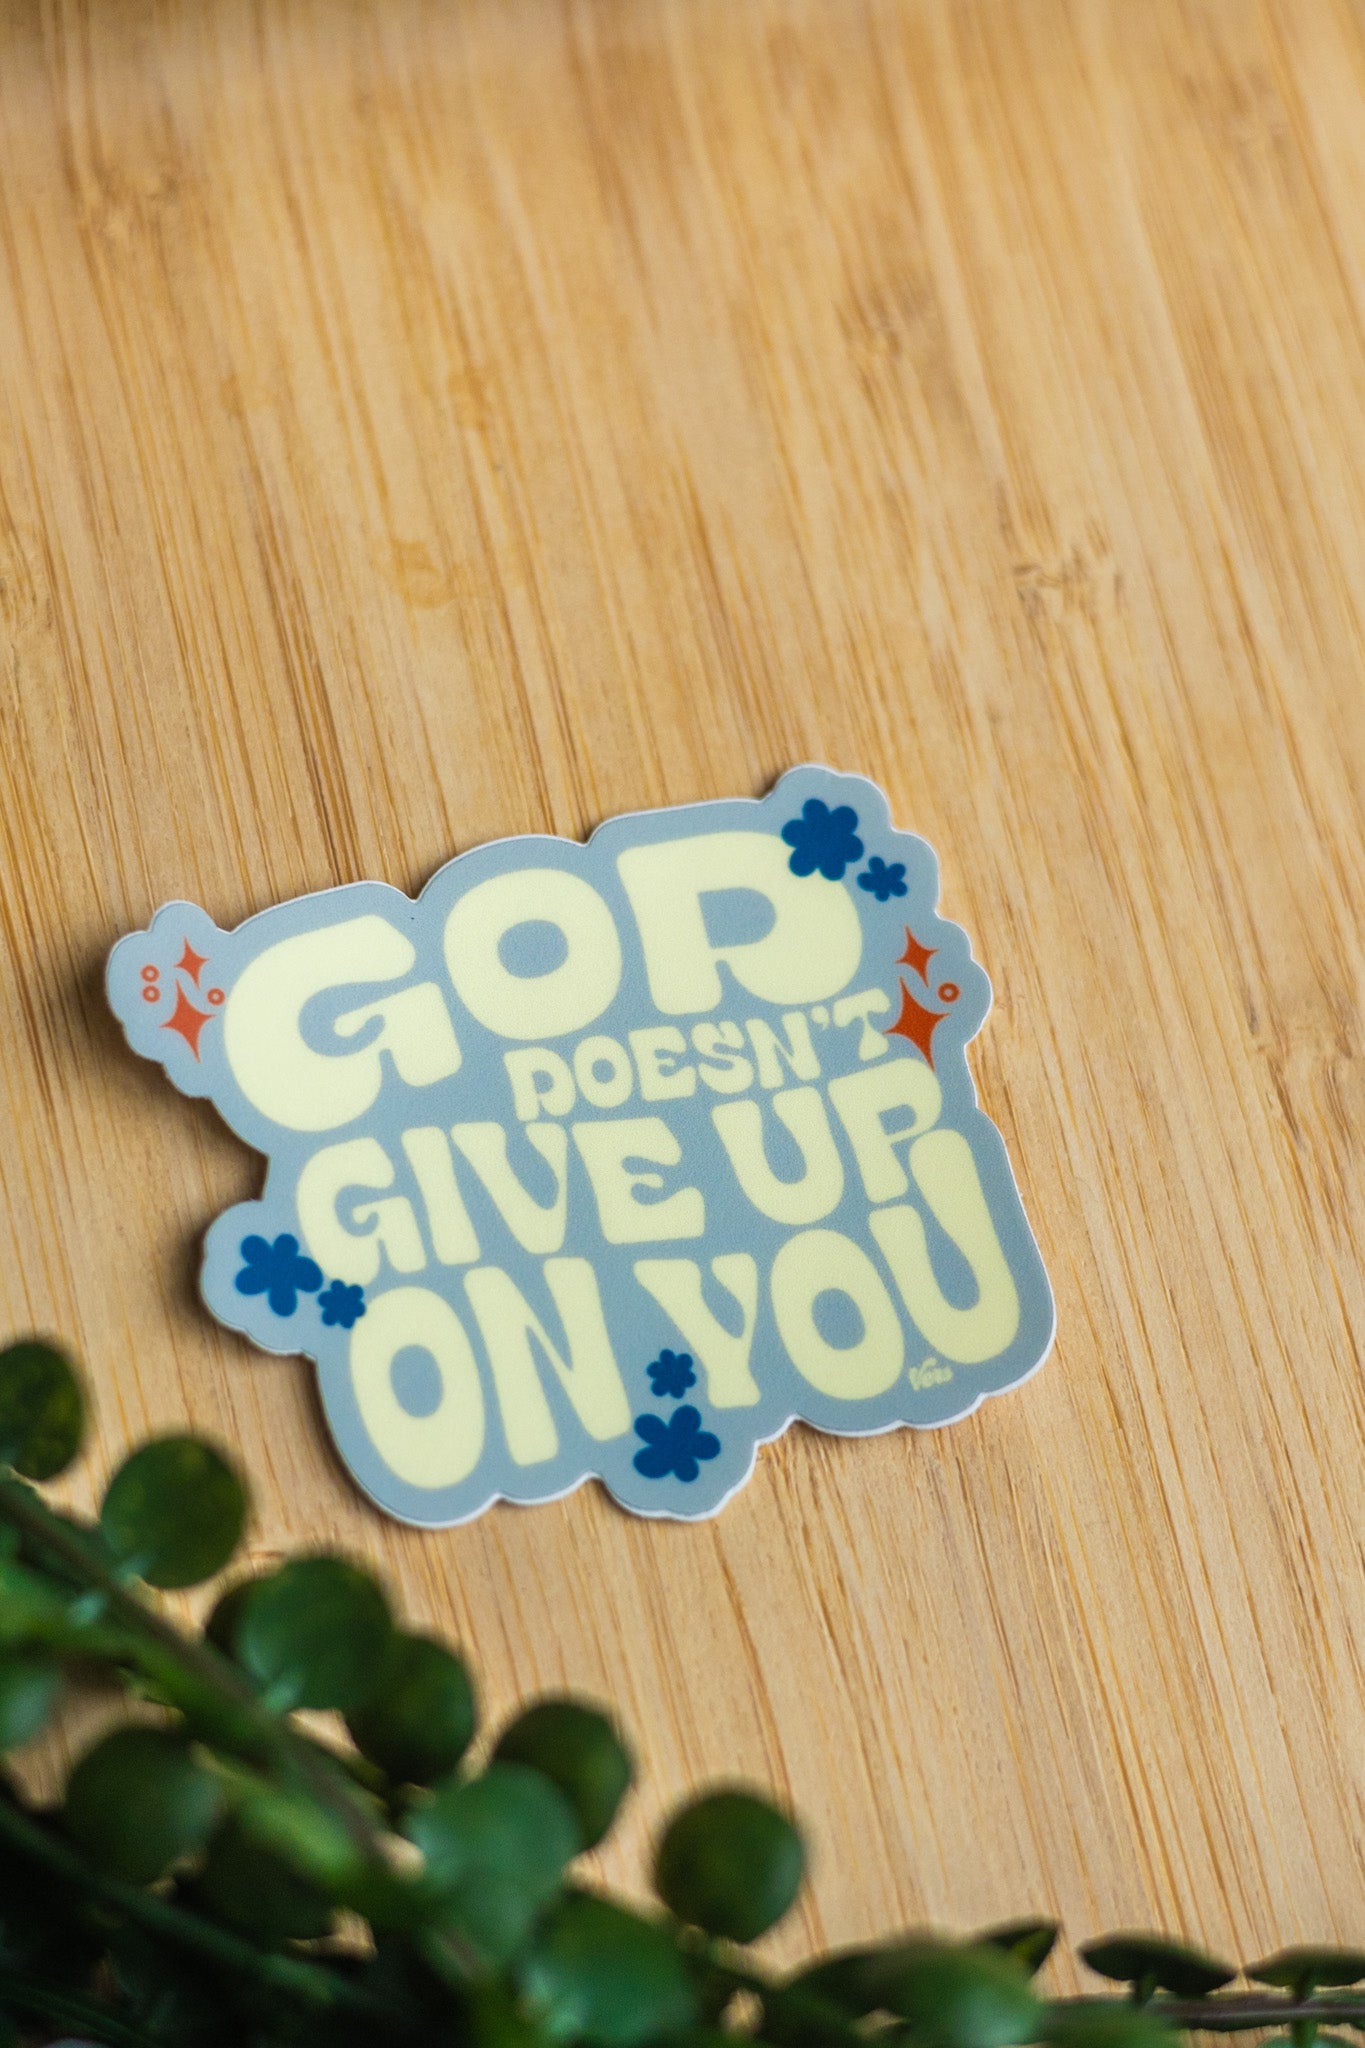 God Doesn't Give Up On You Sticker